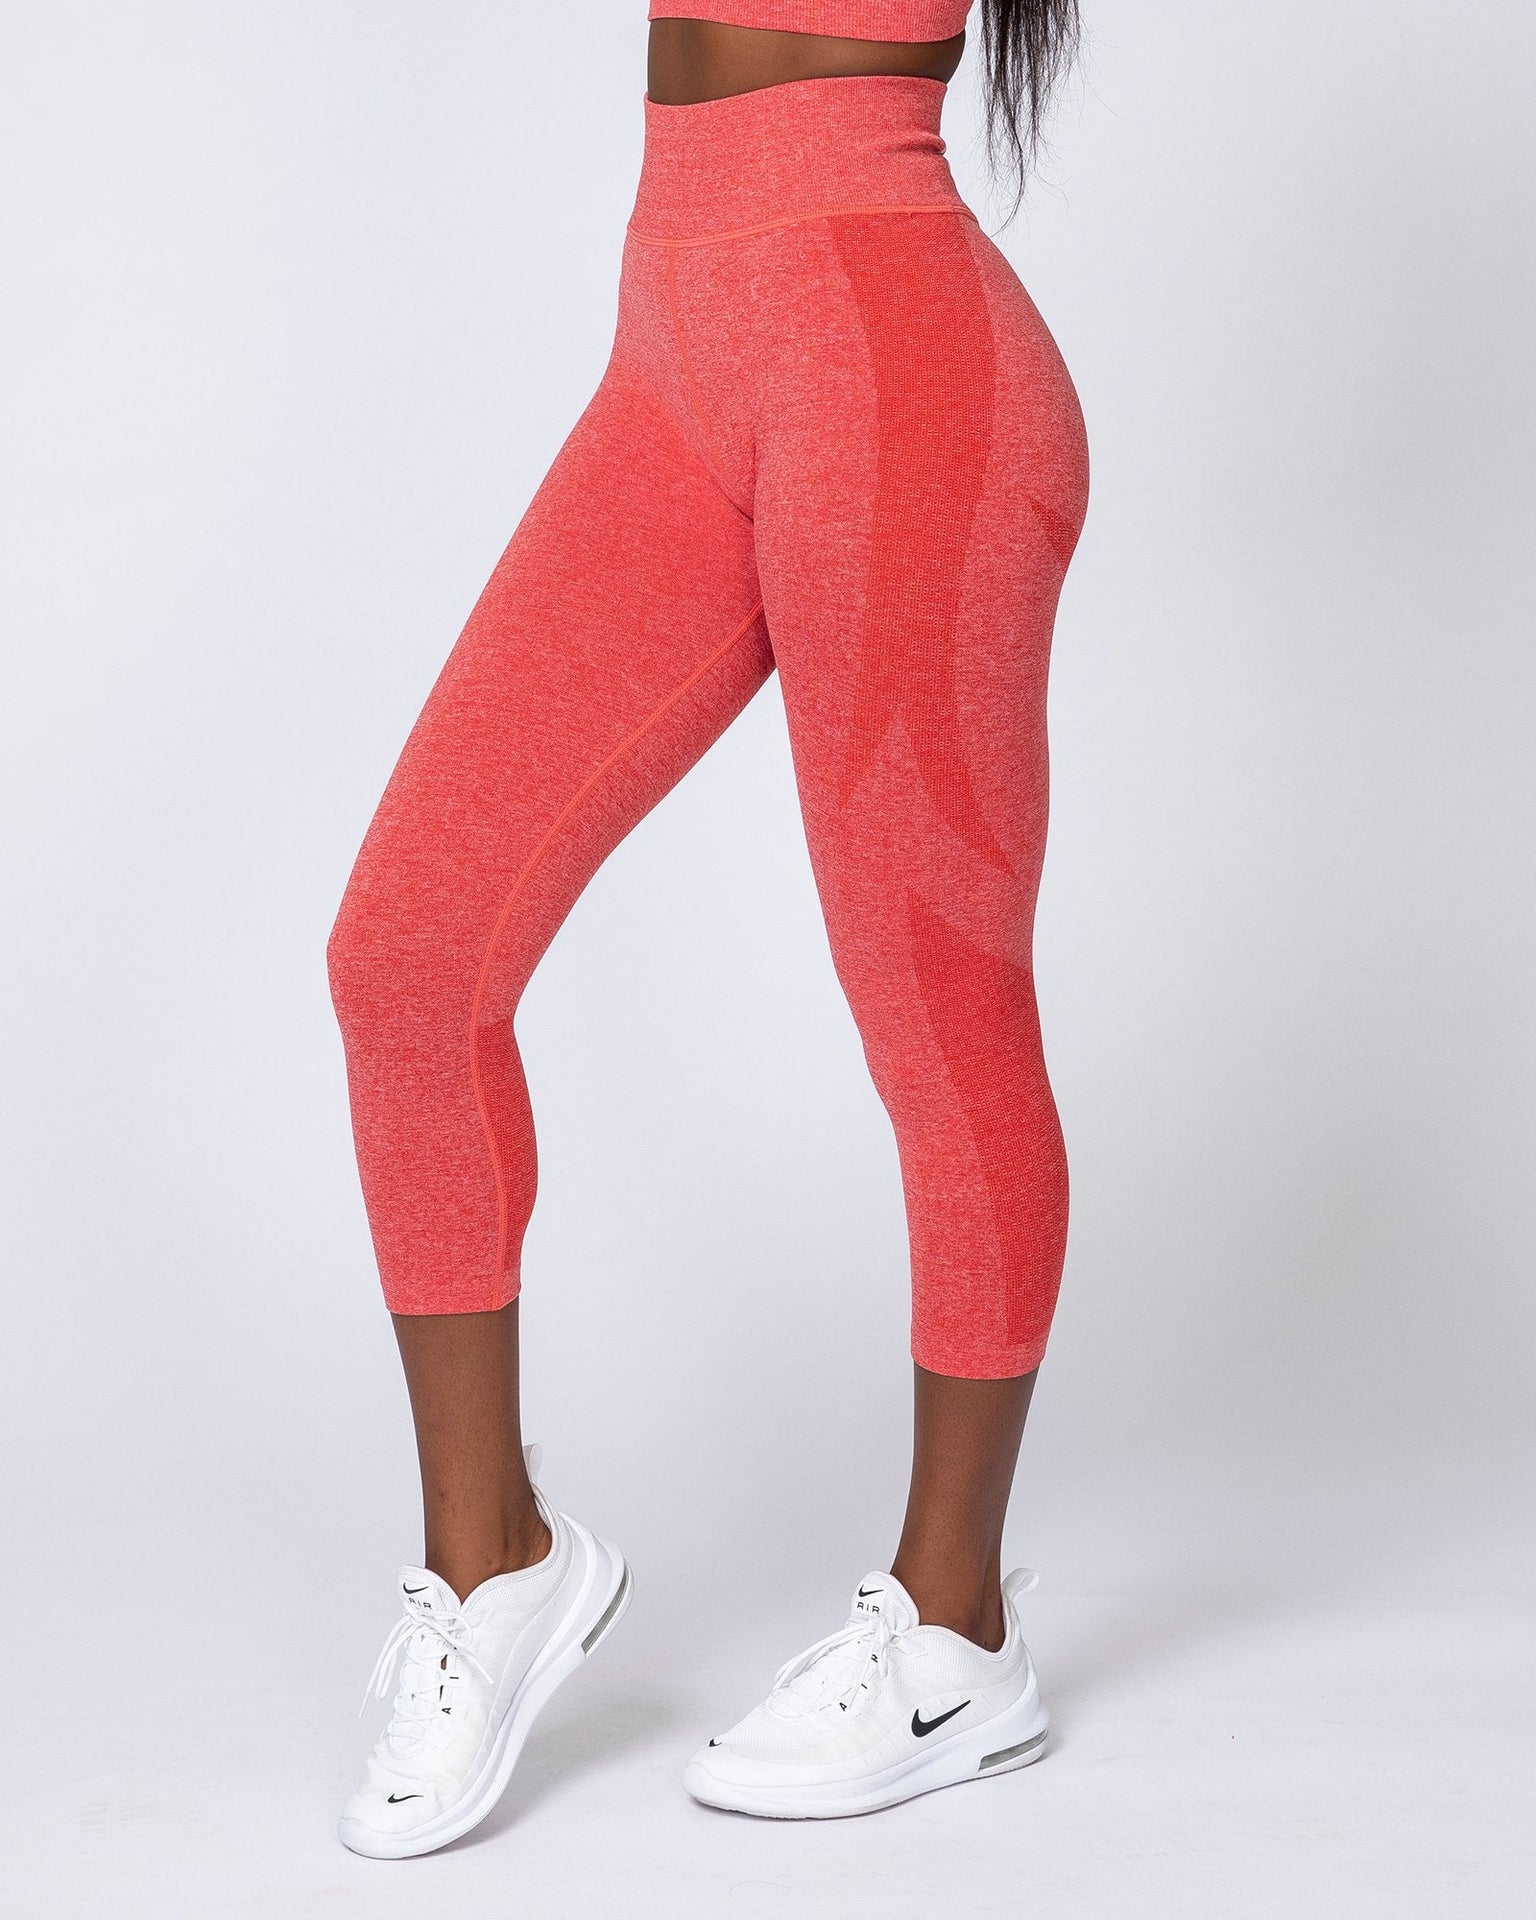 Michele Hi-Rise 7/8 Tight - Coming Up Roses – Illusions Activewear